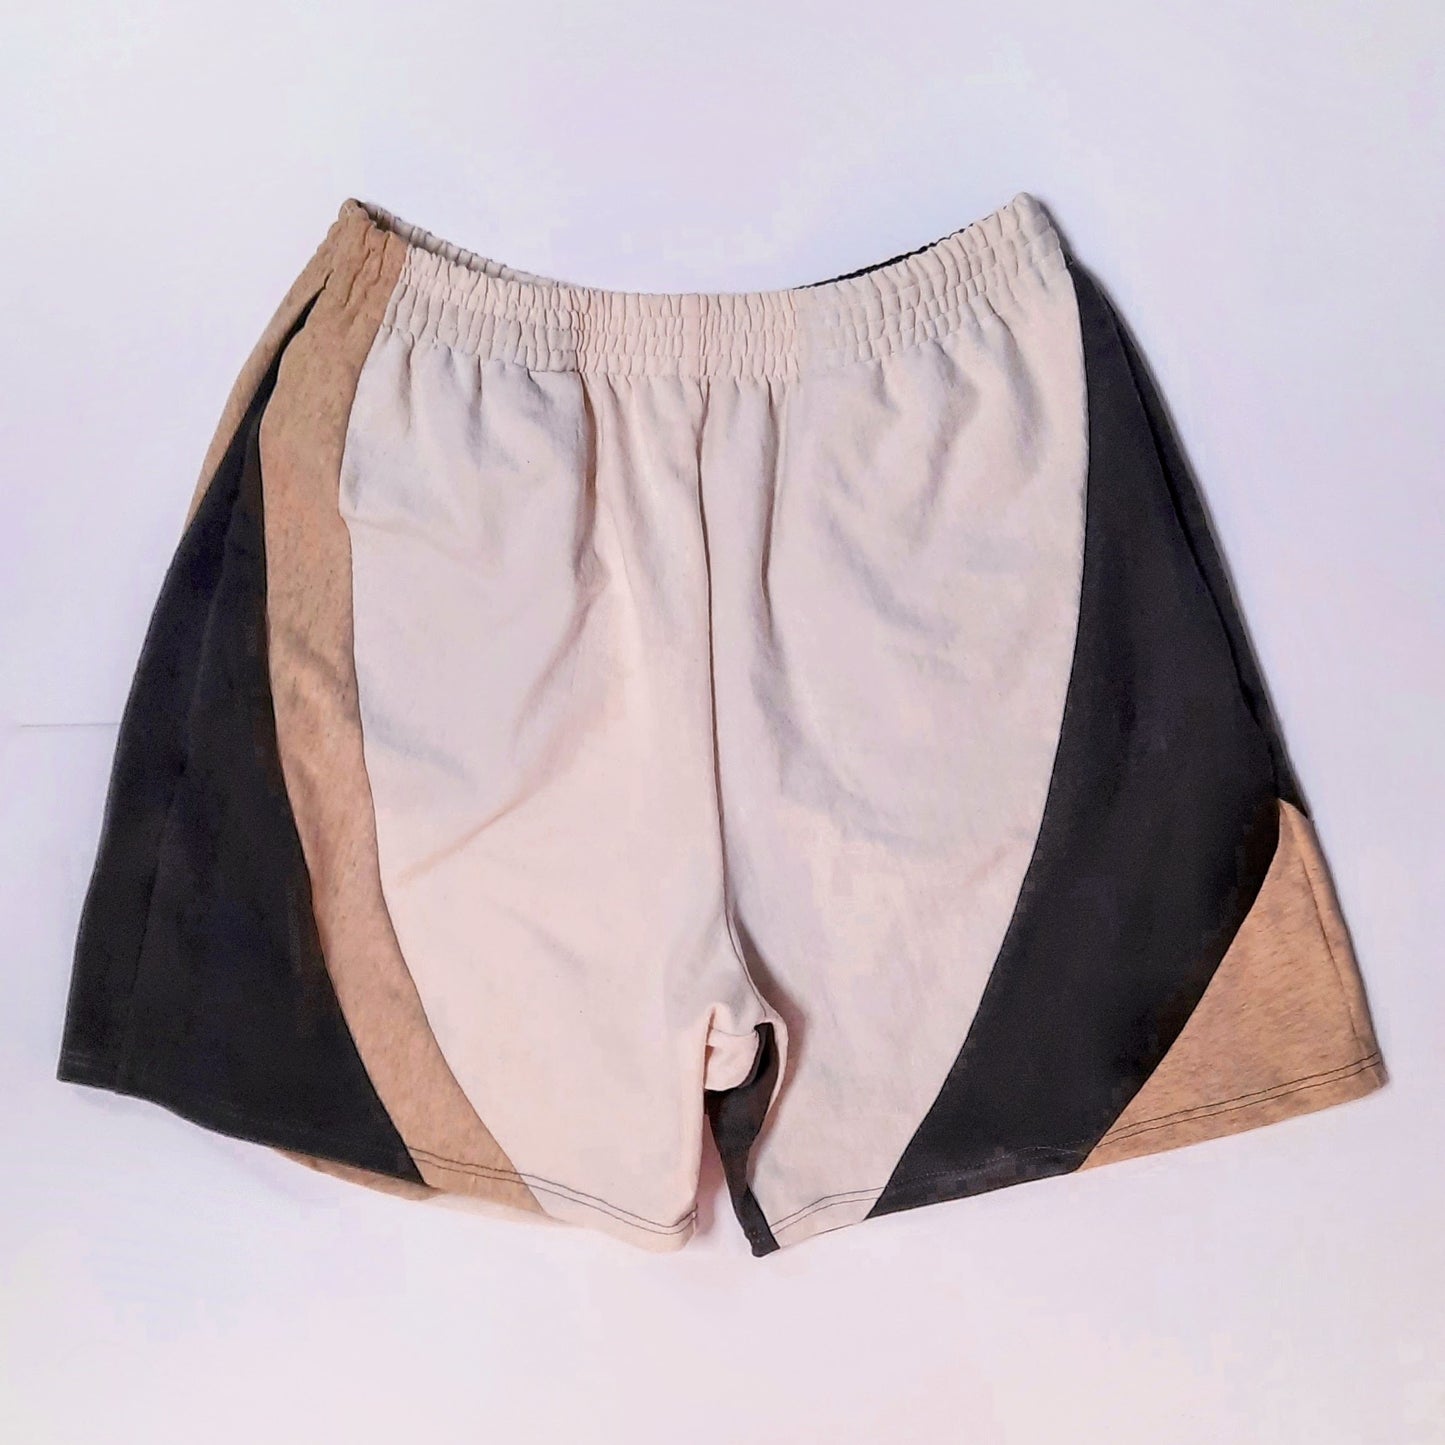 Reworked Carhartt colorblock shorts 28-34"